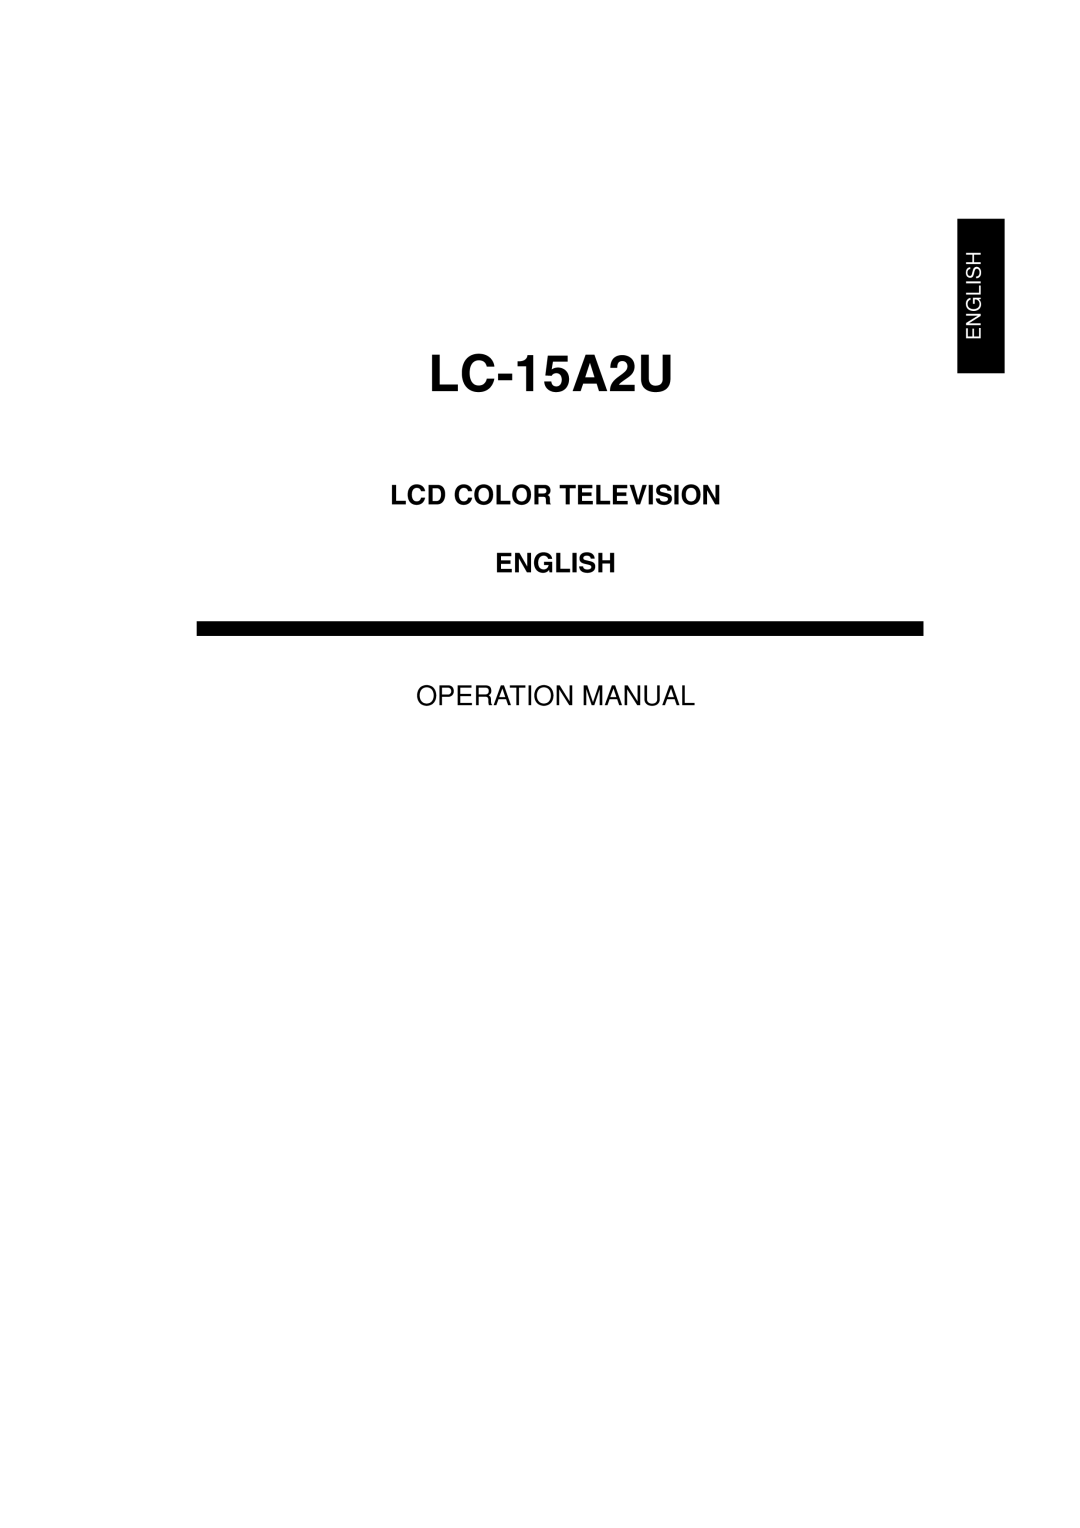 Sharp LC 15A2U operation manual Lcd Color Television English, Operation Manual, LC-15A2U 